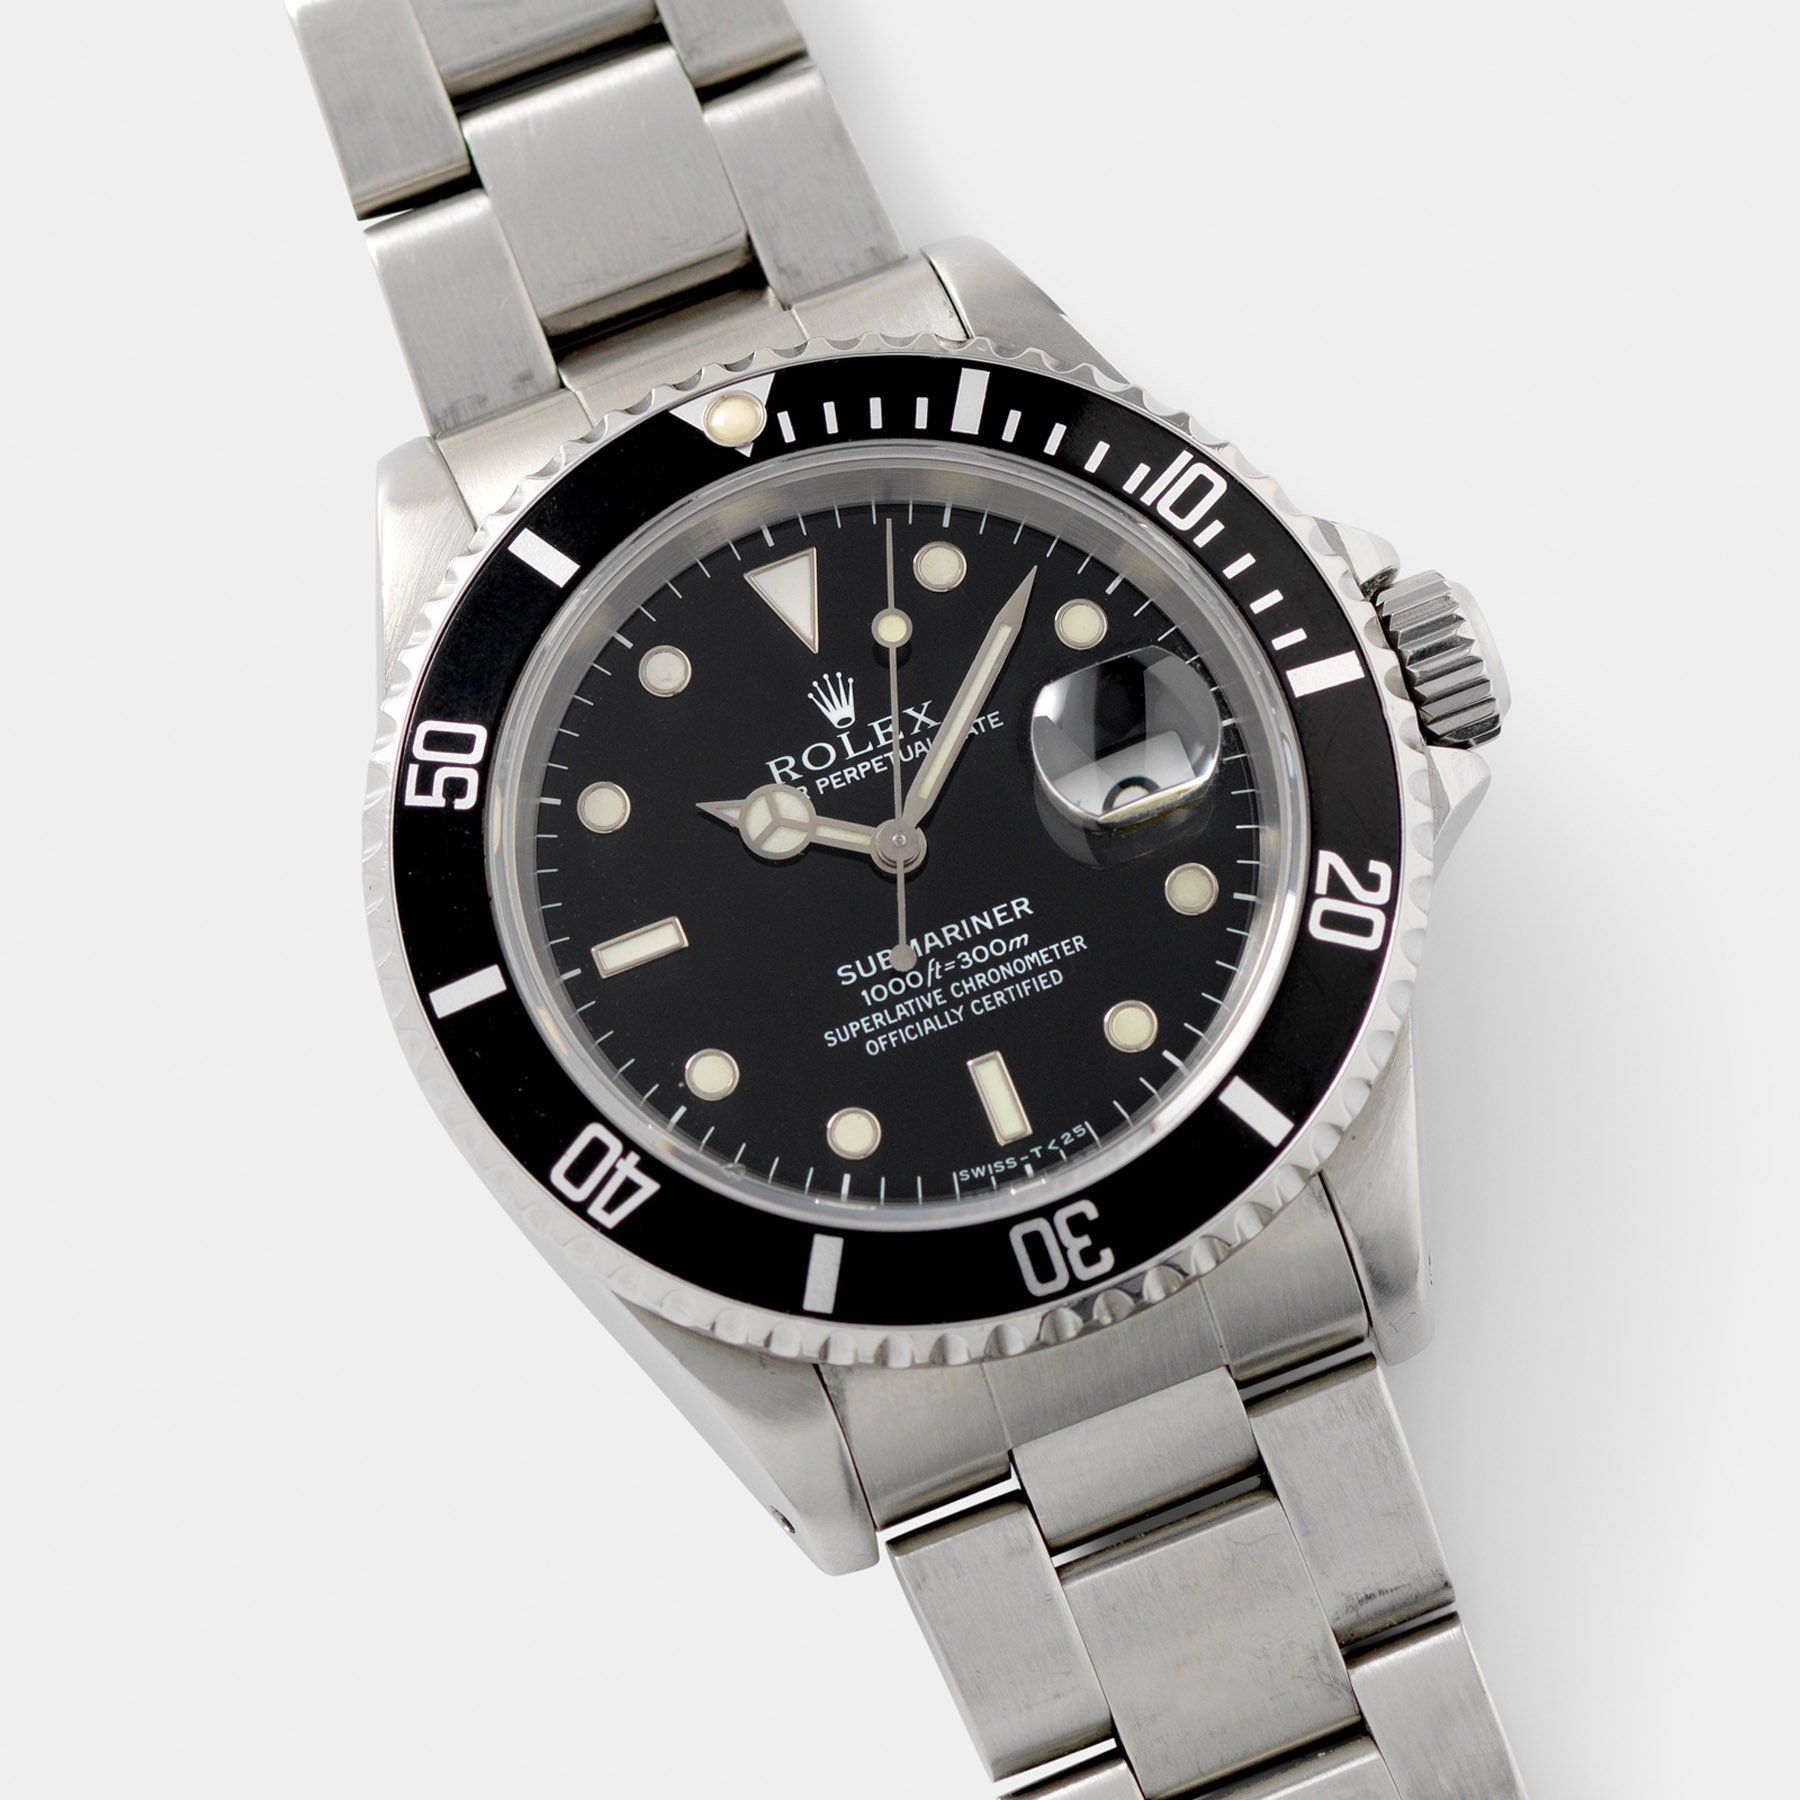 Rolex Submariner Date Reference 16610 with Papers and lovely glossy dial